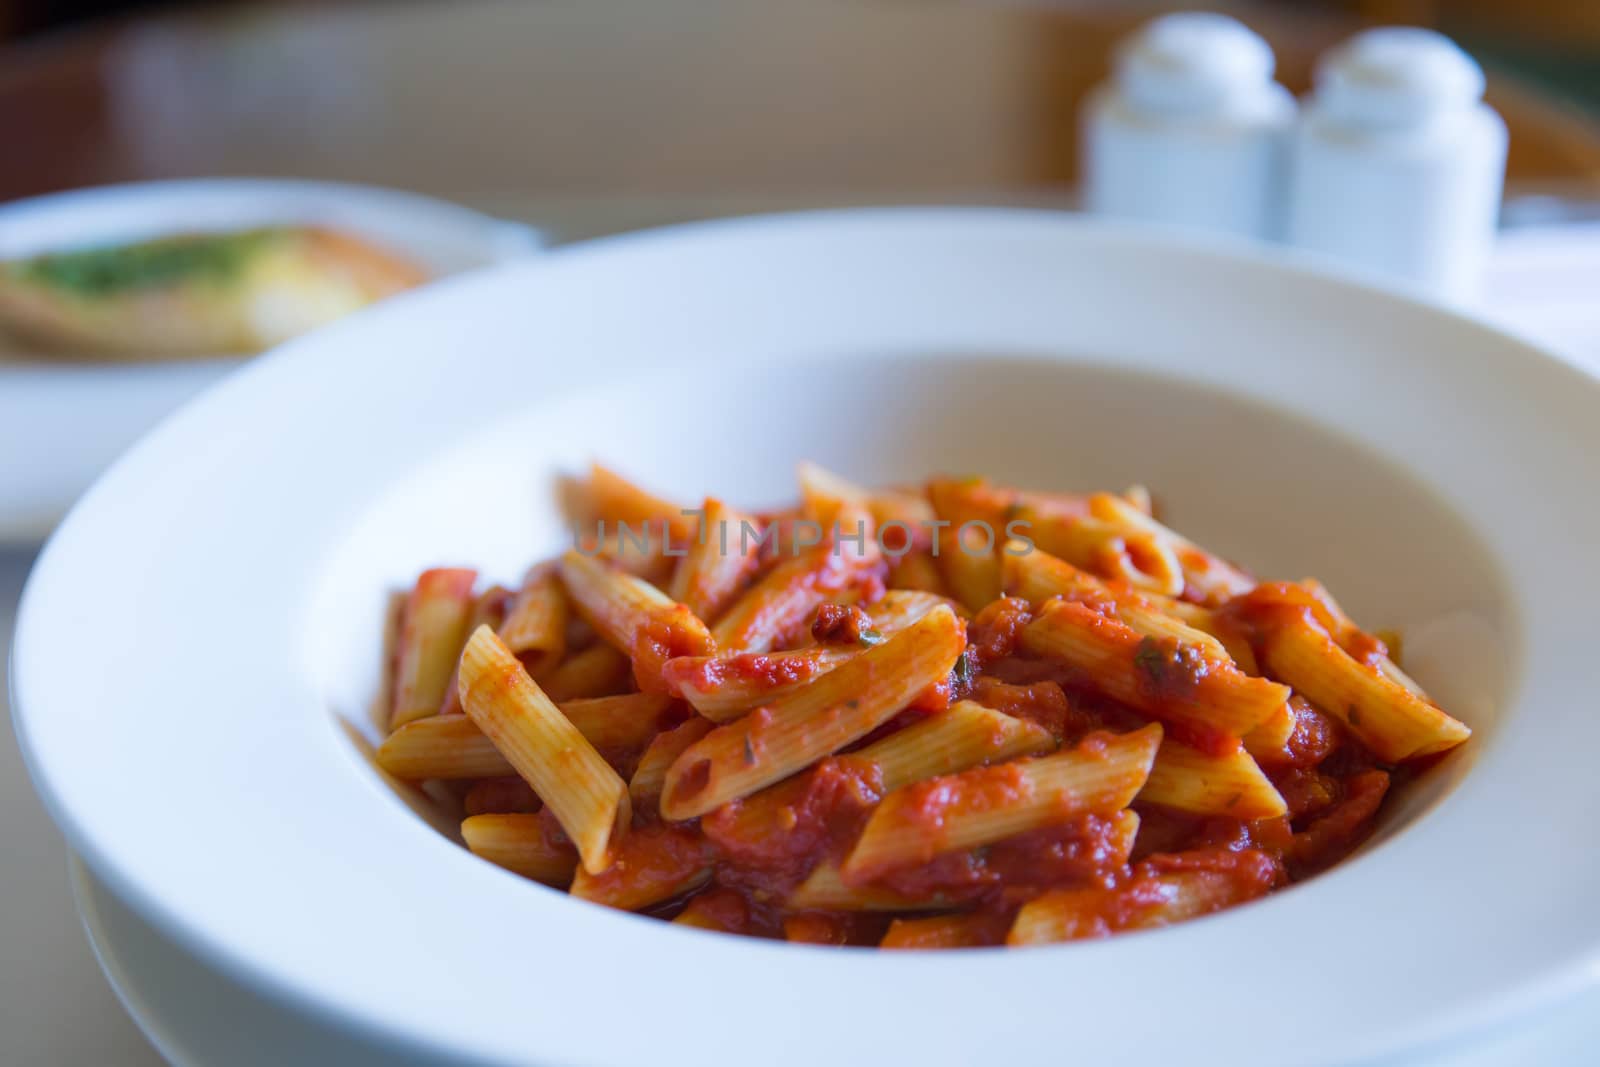 A plate of penne arrabbiata from a hotel room service